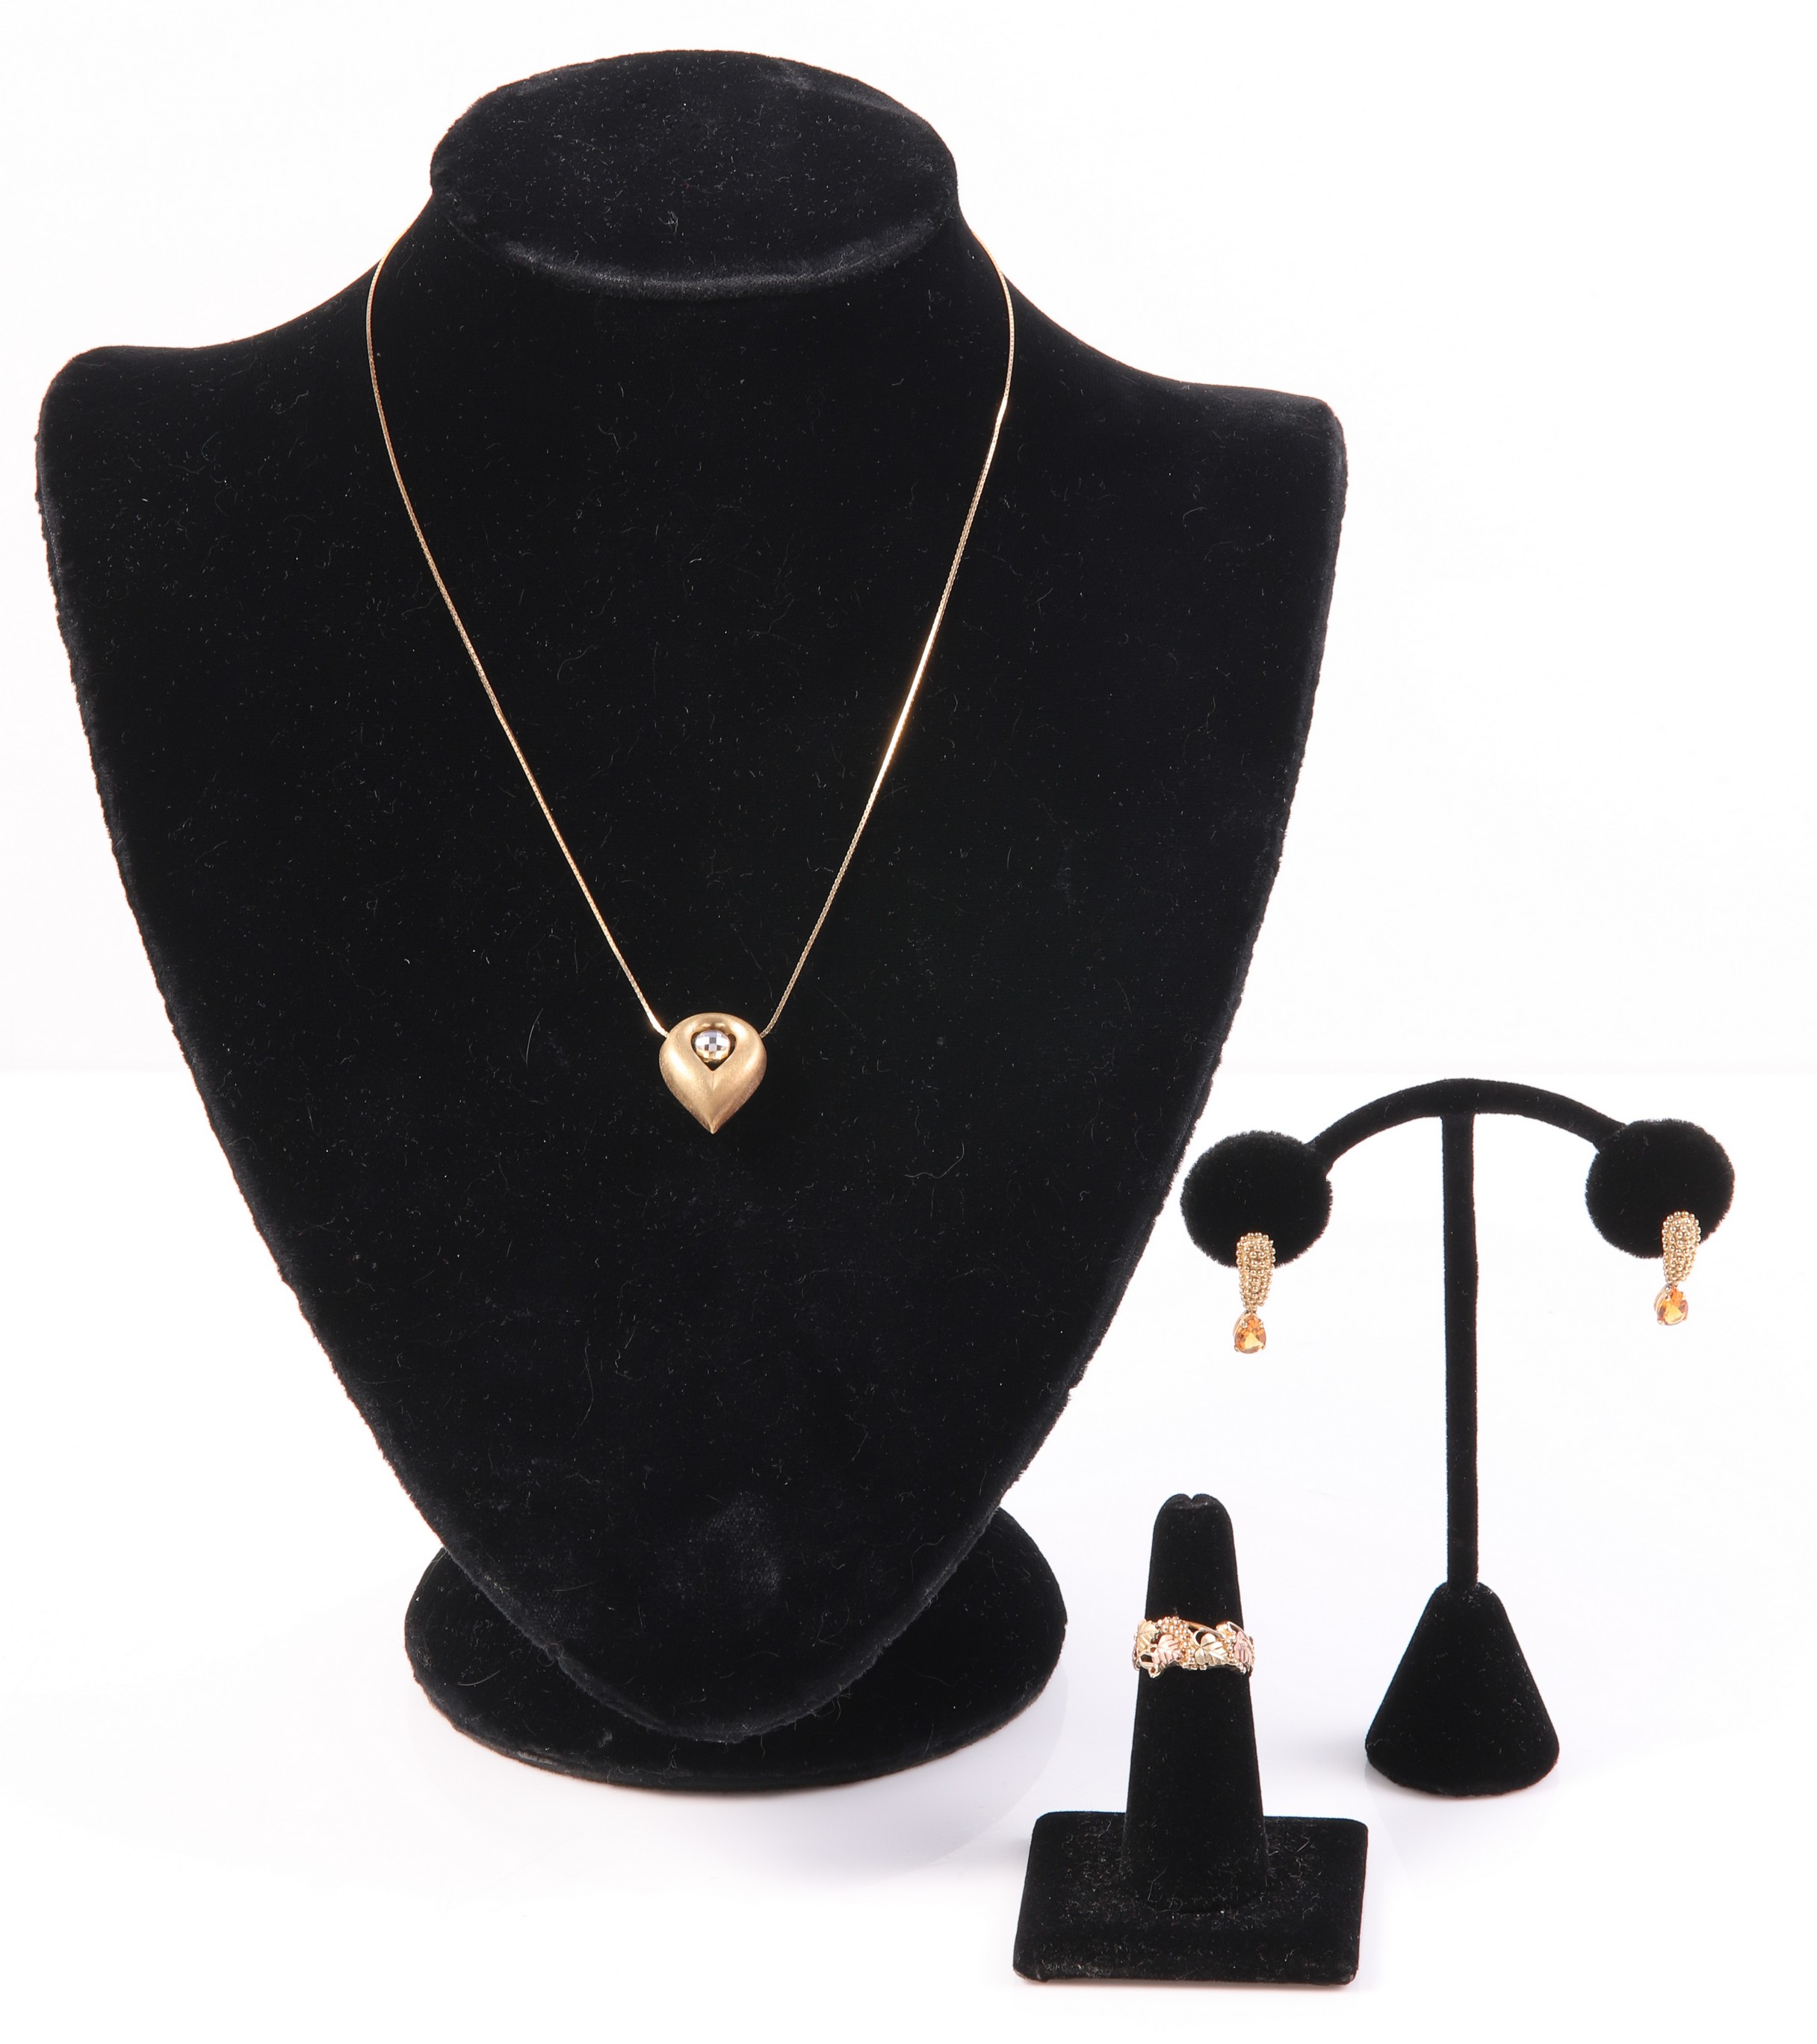  3 Gold necklace earrings and 2e12fe